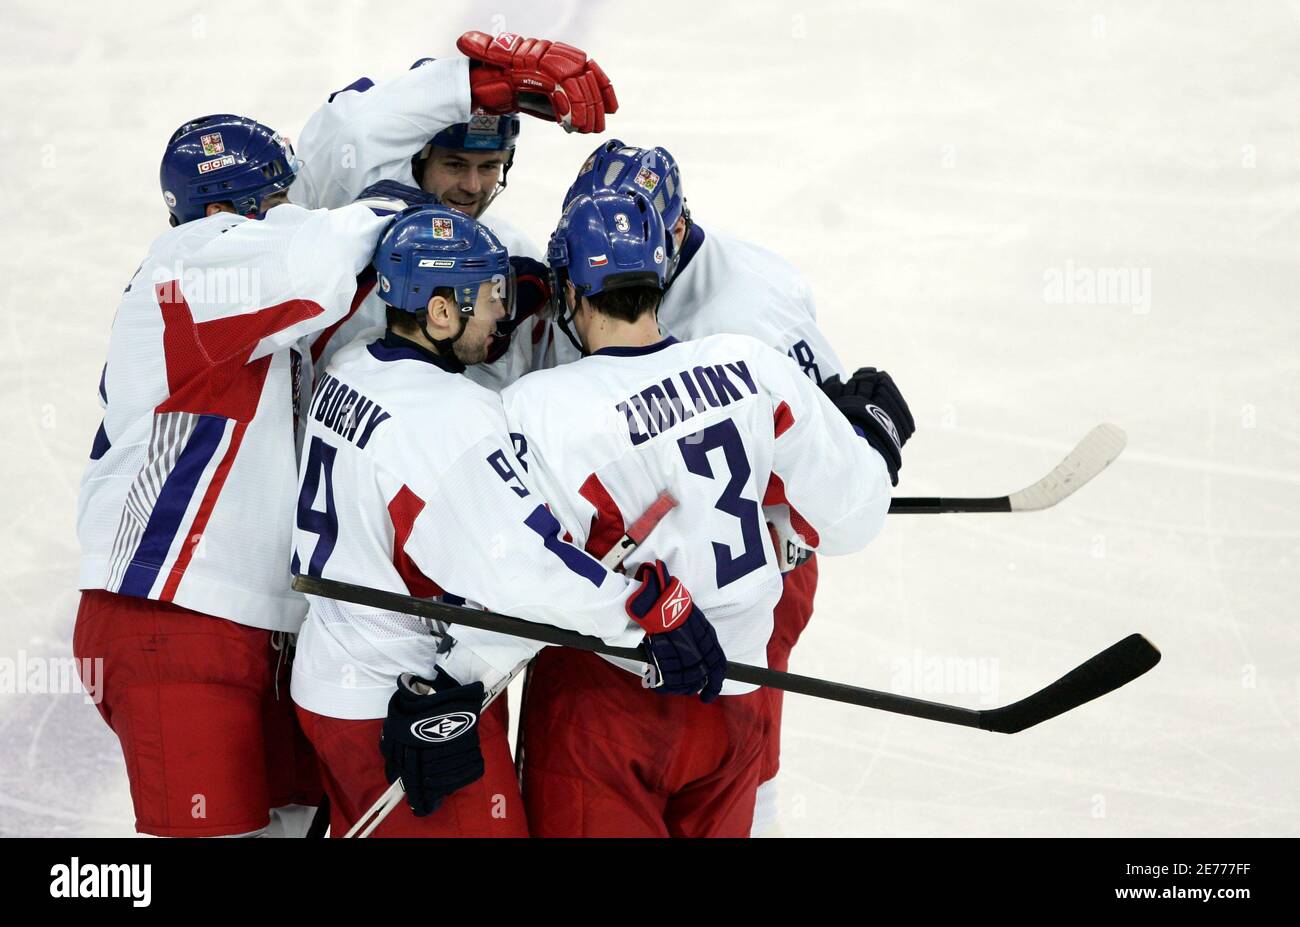 Czech Republic's Marek Zidlicky (R) celebrates with teammates Tomas Kaberle  (L), David Vyborny (2nd L) and Robert Lang (2nd R) after scoring his team's  second goal against Russia during second period play